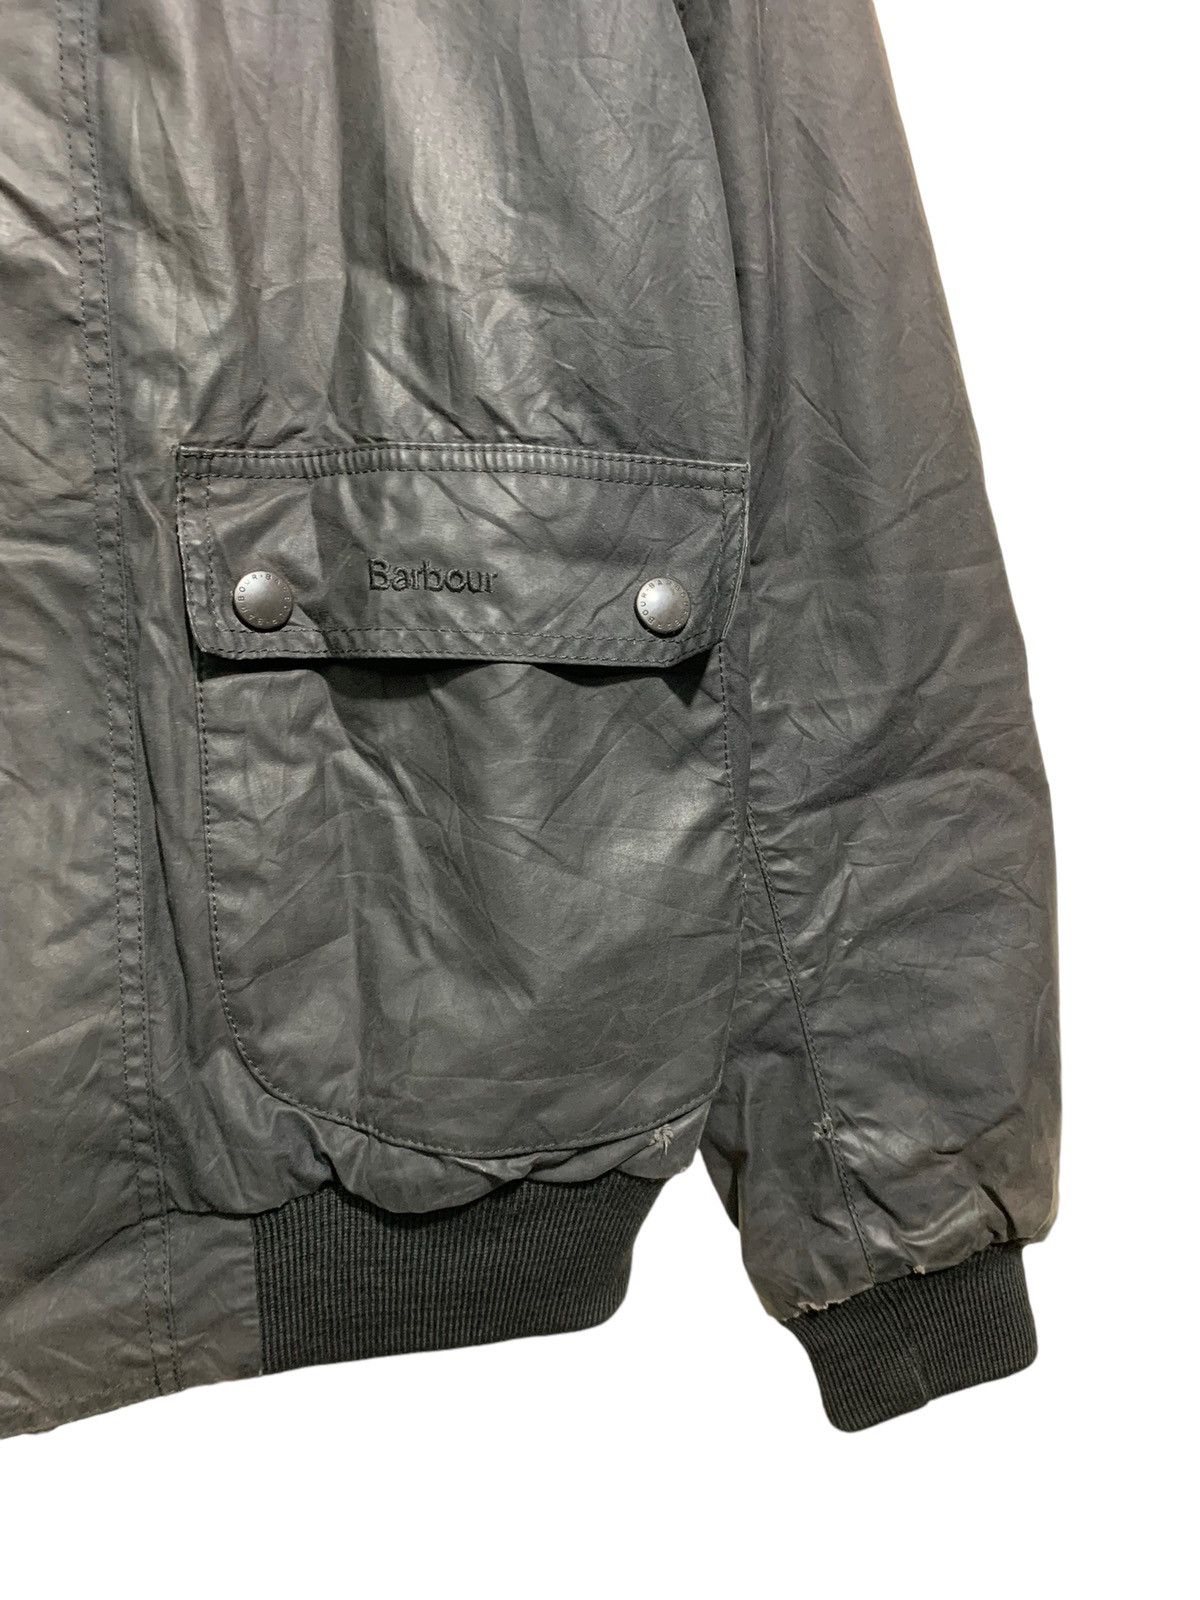 🔥BARBOUR INTERNATIONAL WAXED BOMBER JACKETS - 3